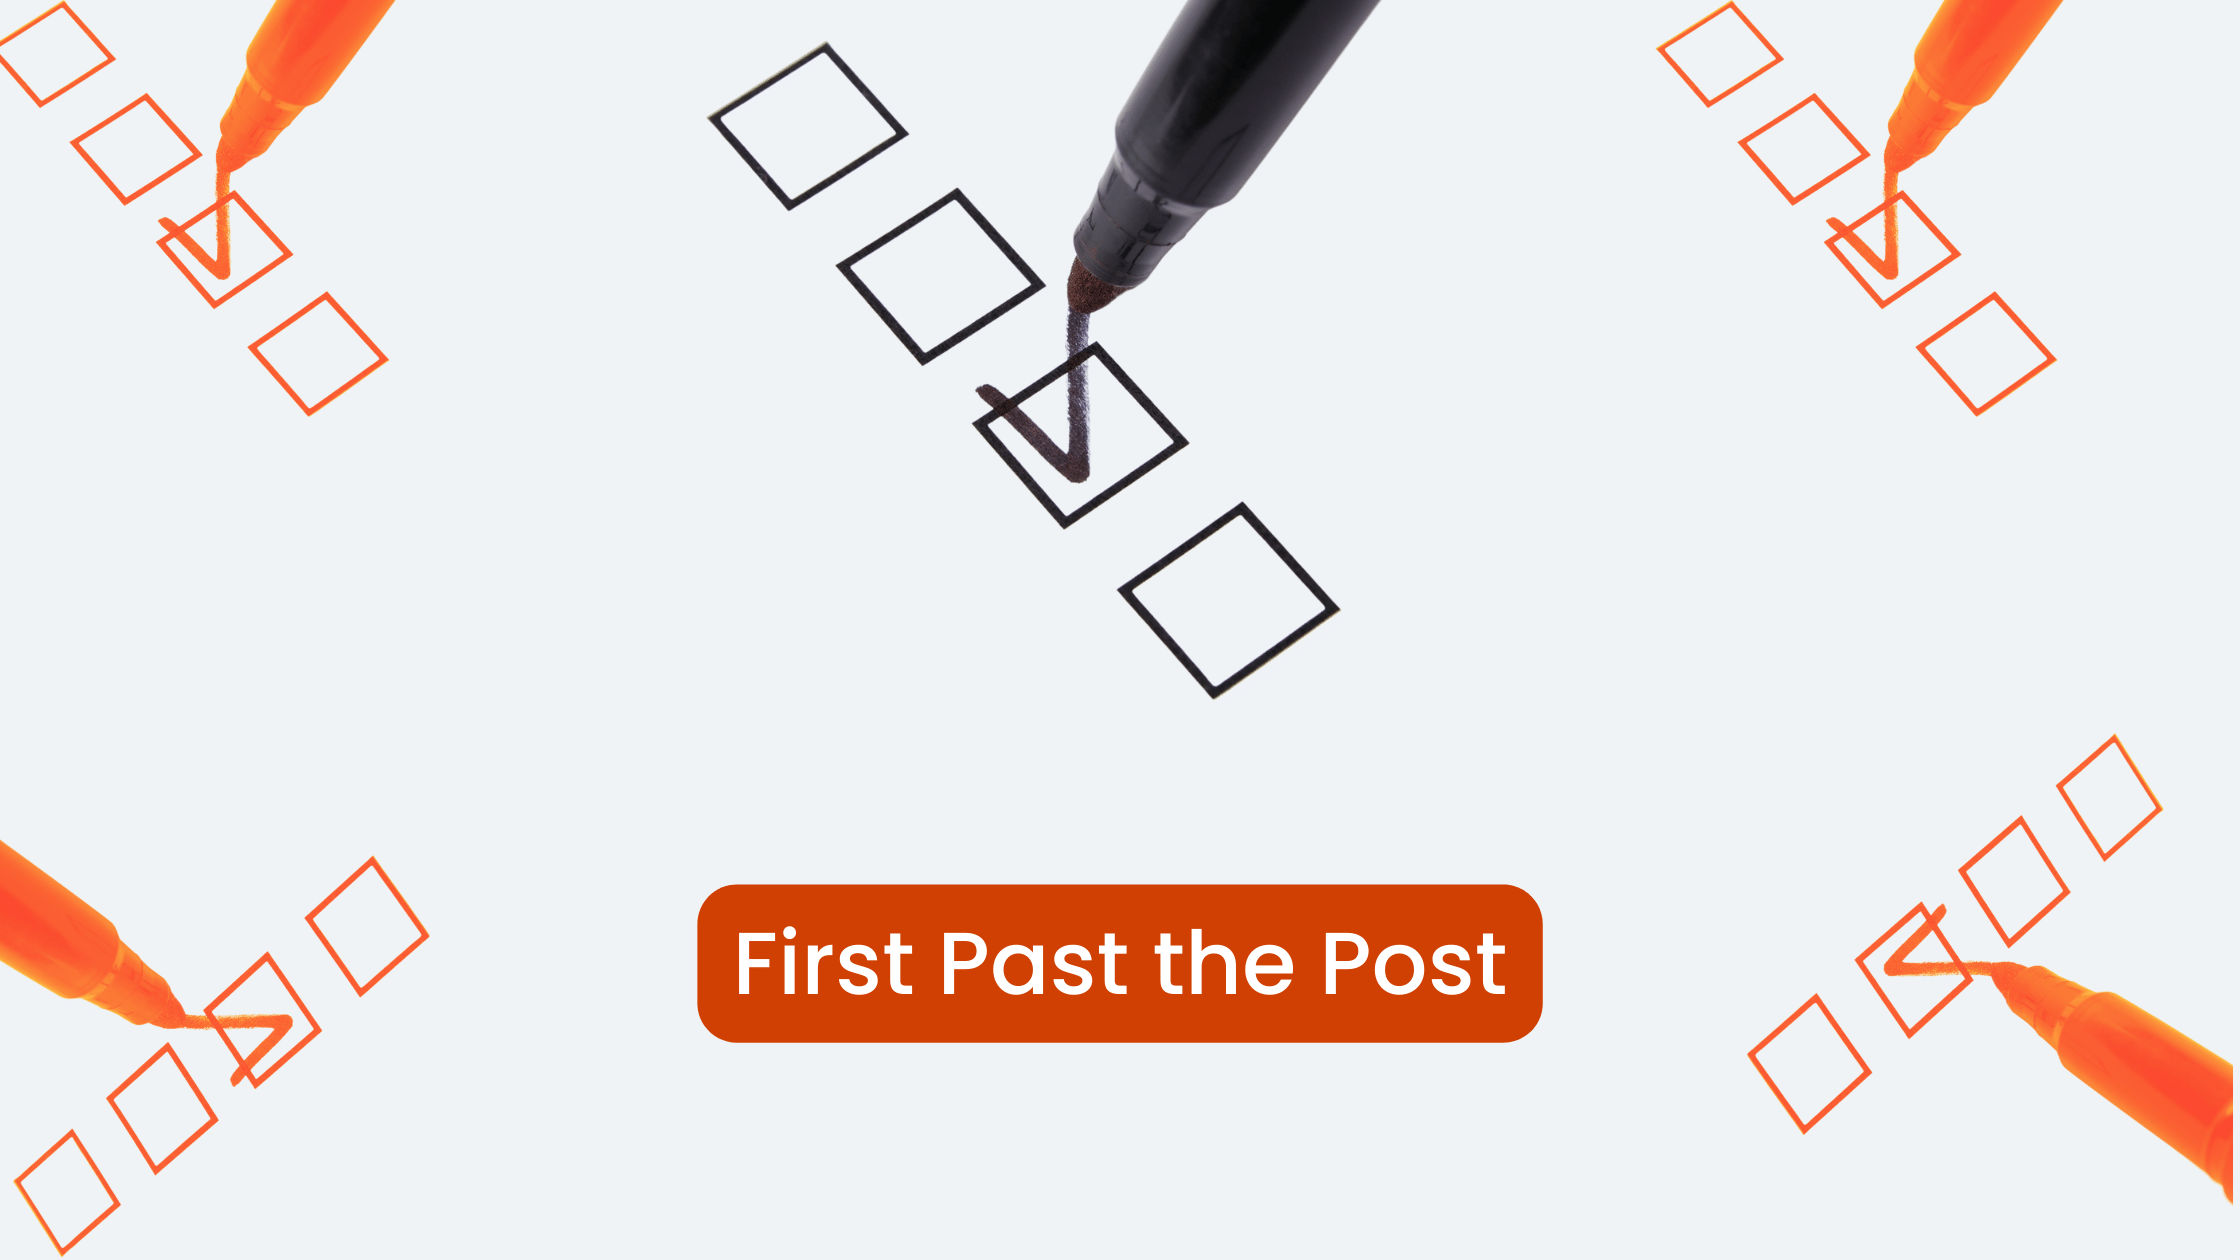 First past the post